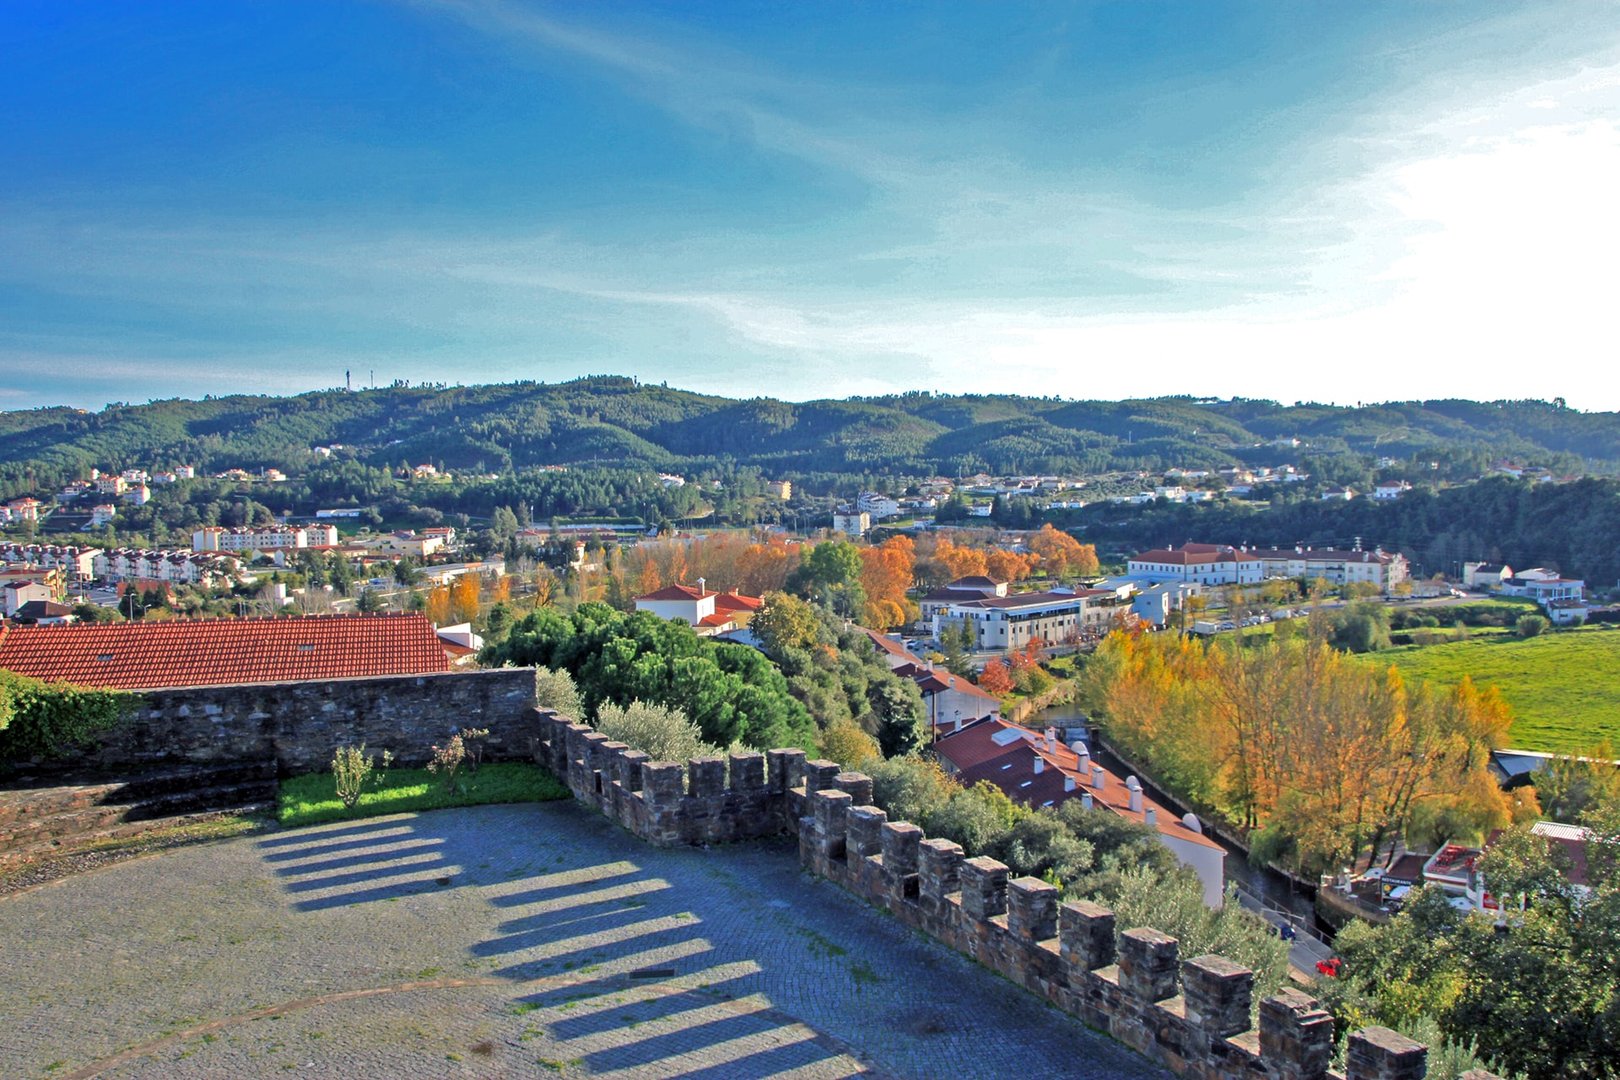 South view of the village of Sertã, from the tower (Castle of Sertã)